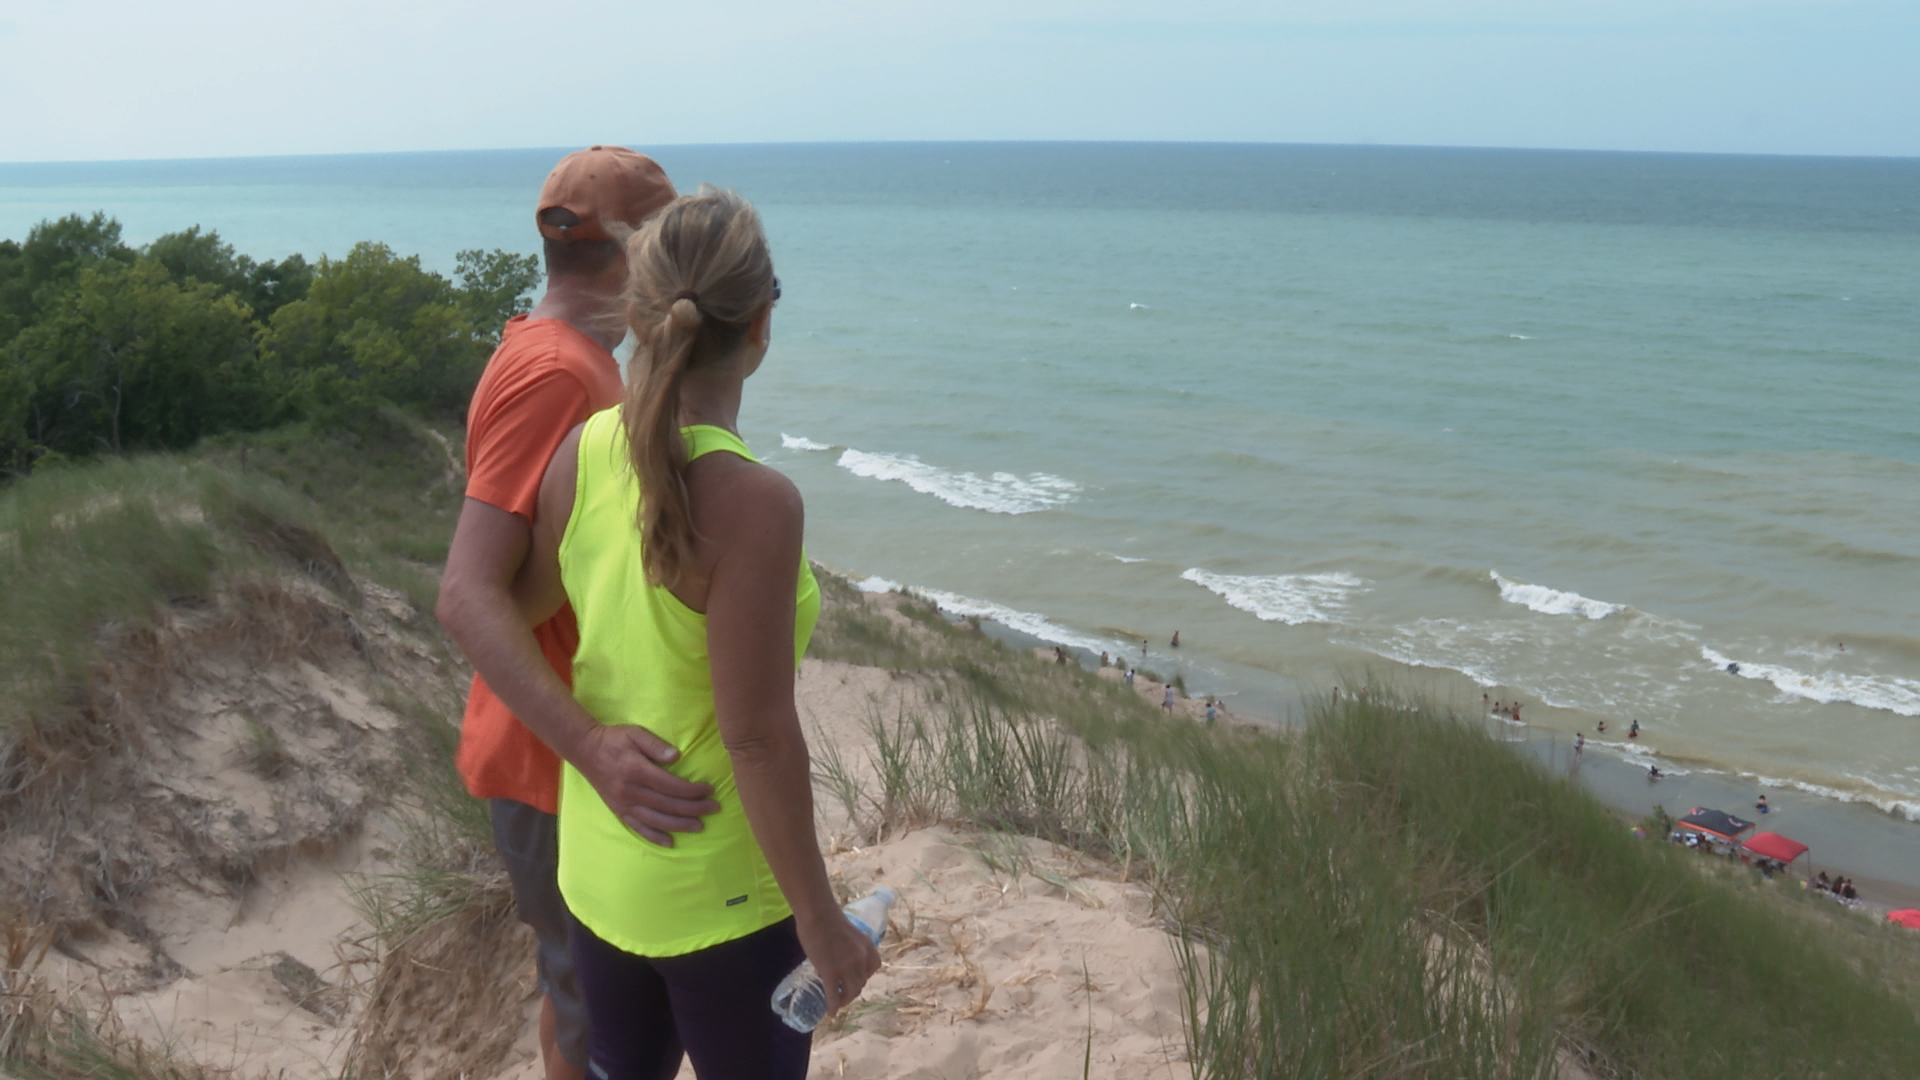 As a new national park, the Indiana Dunes gets more visitors to its beaches and trails.